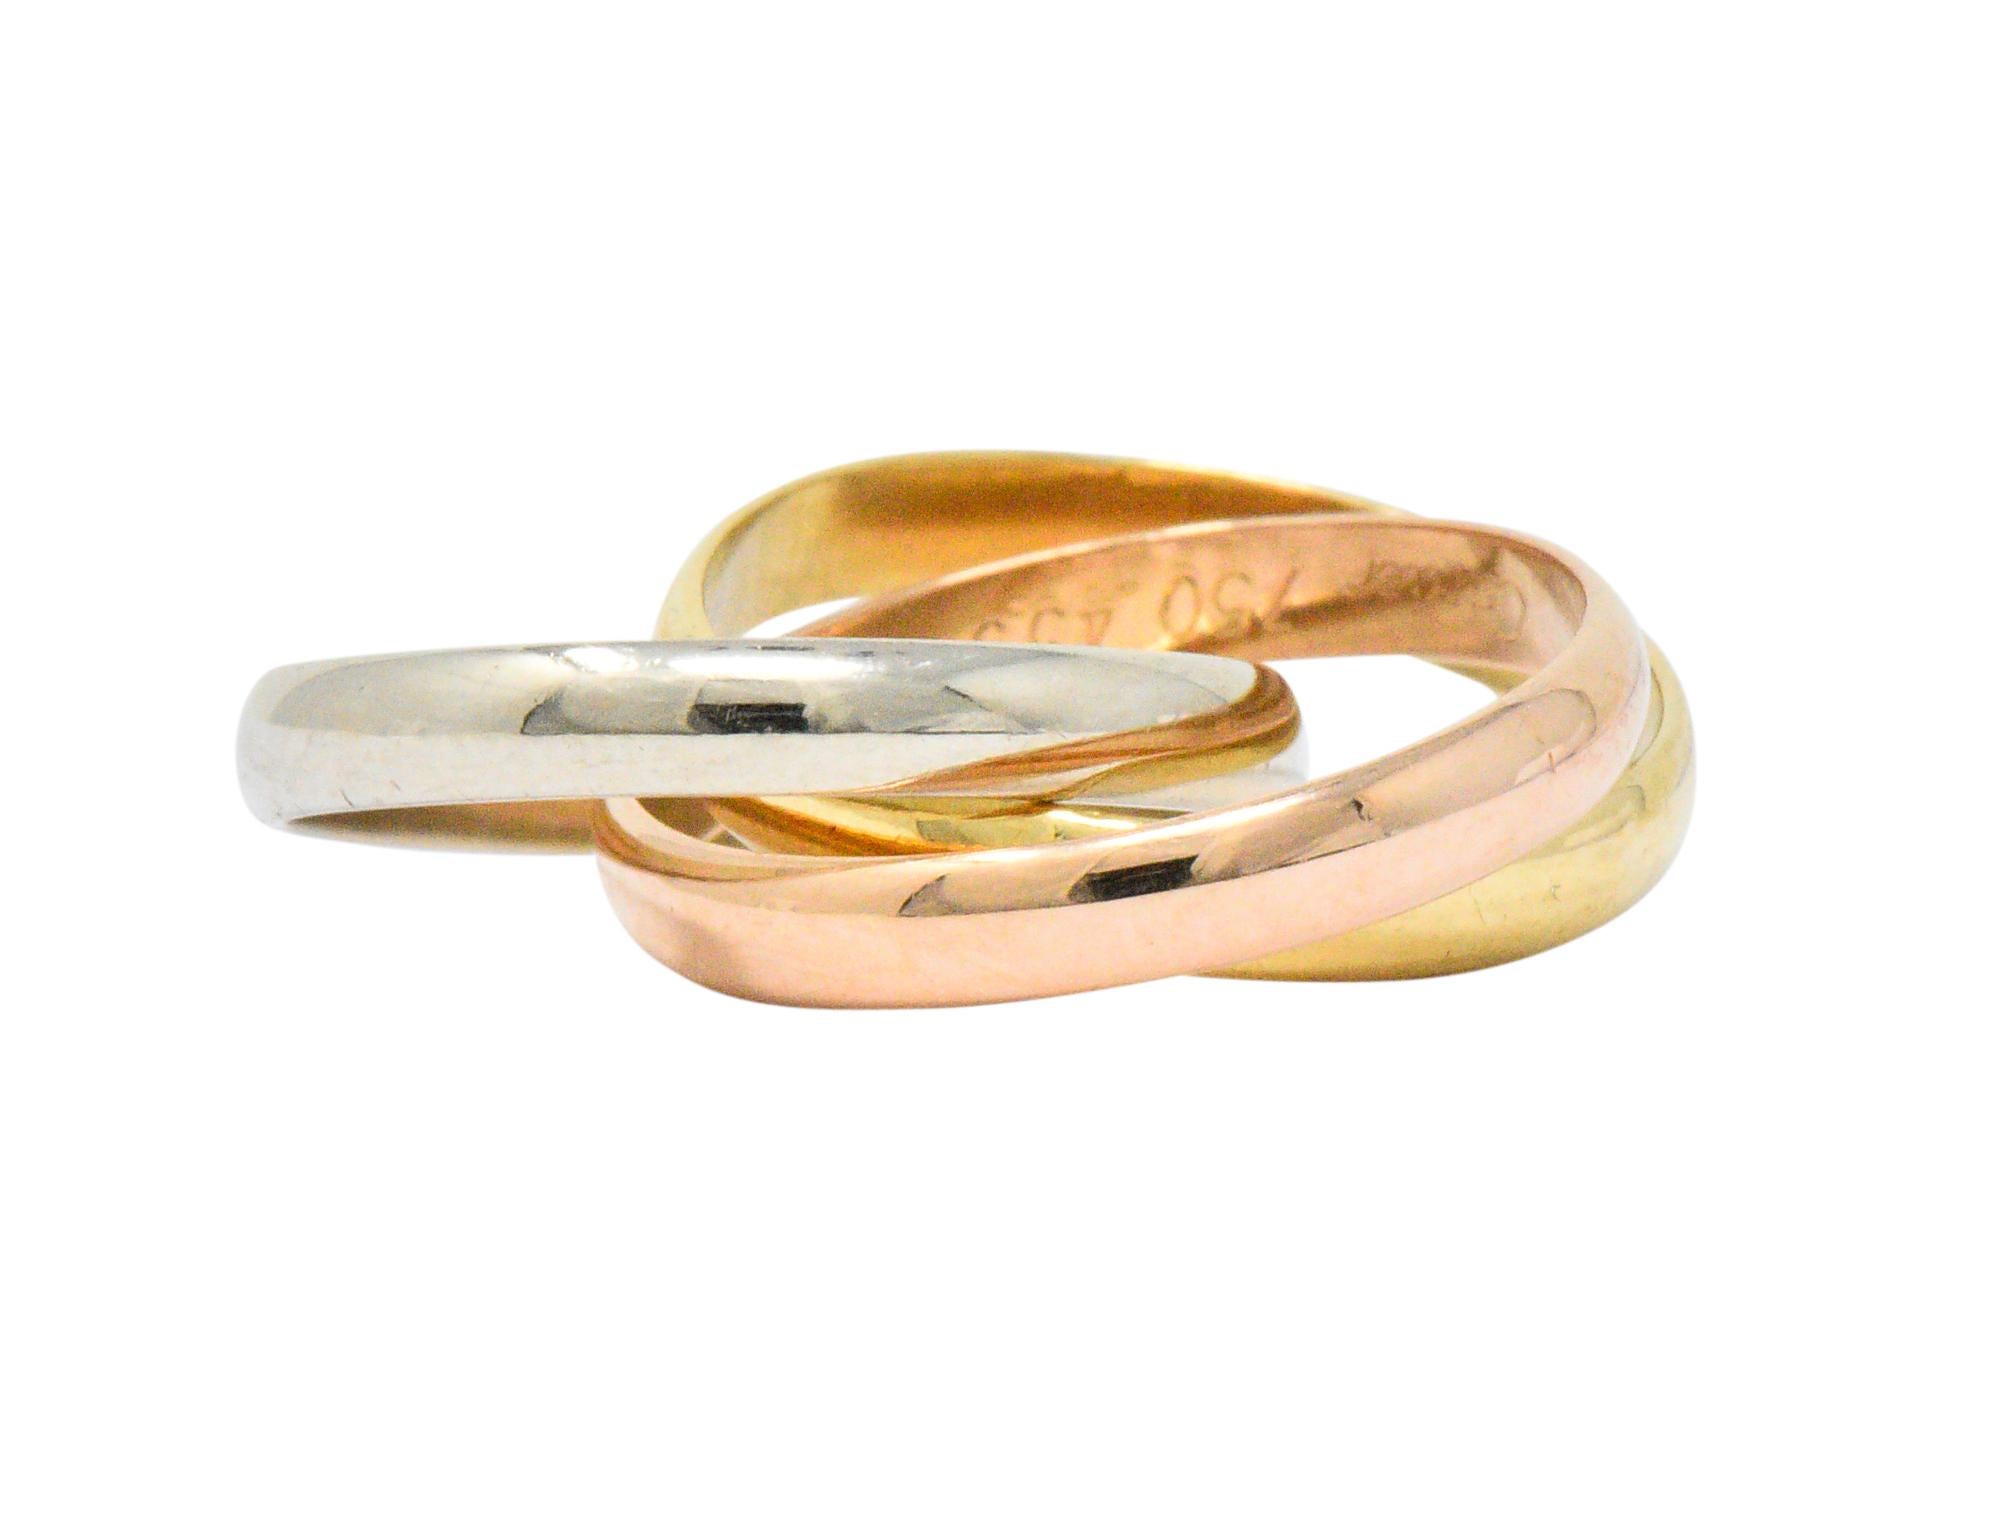 Featuring 3 interlocking half-round bands in 18 karat white, yellow and rose gold

From the famous and highly coveted 'Trinity' collection

Fully signed Cartier with maker's mark and stamped 